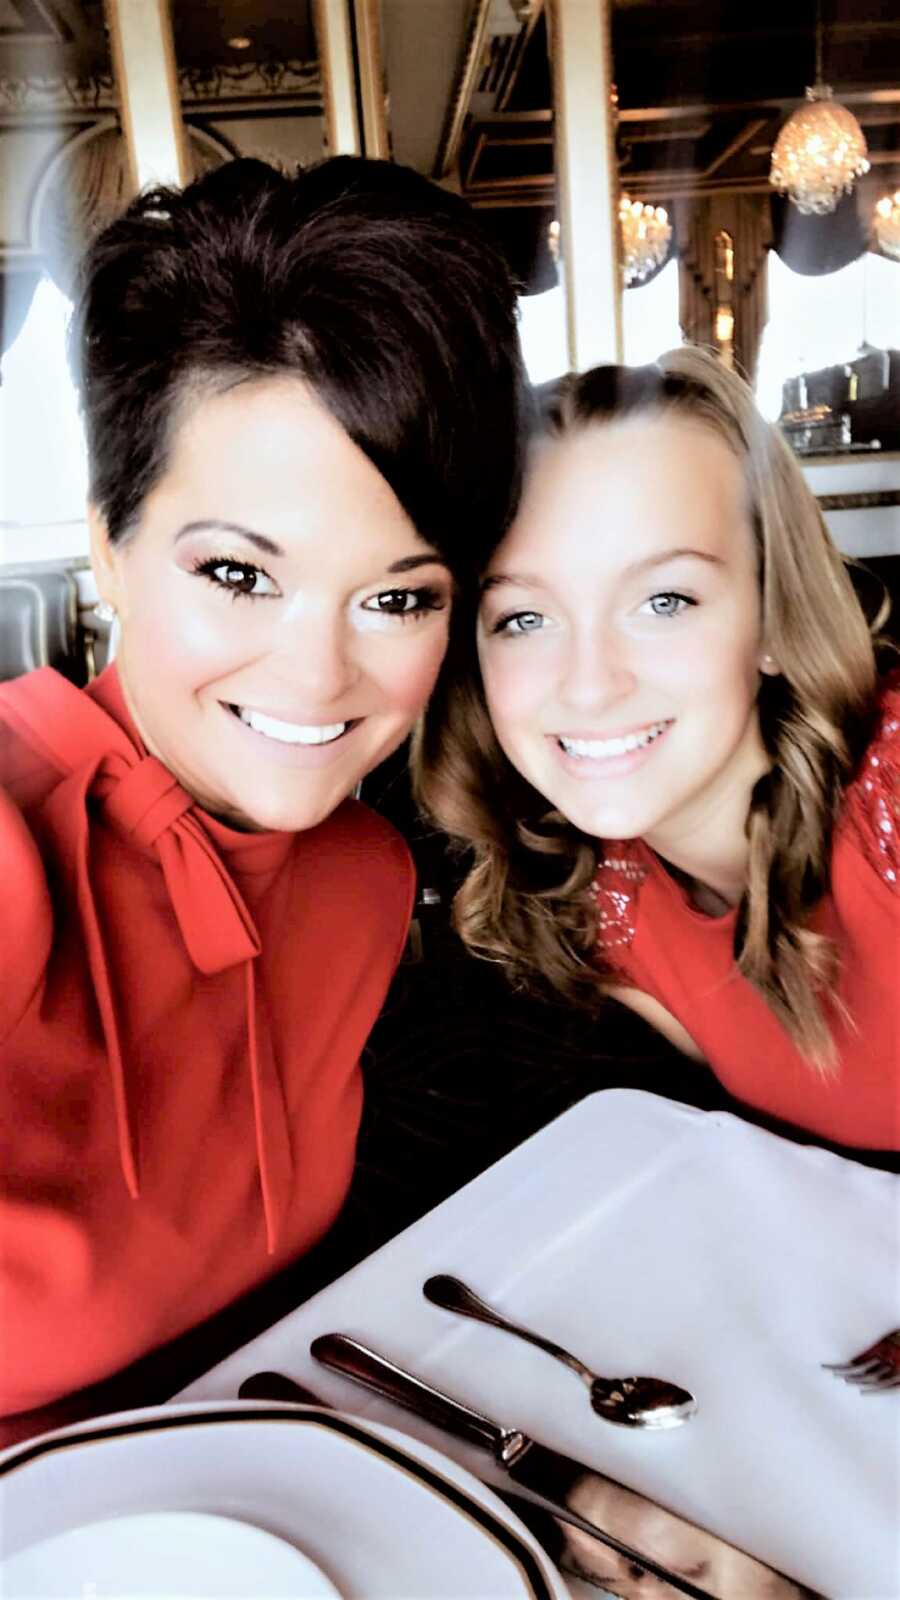 selfie of mother and daughter sitting at a restaurant's table